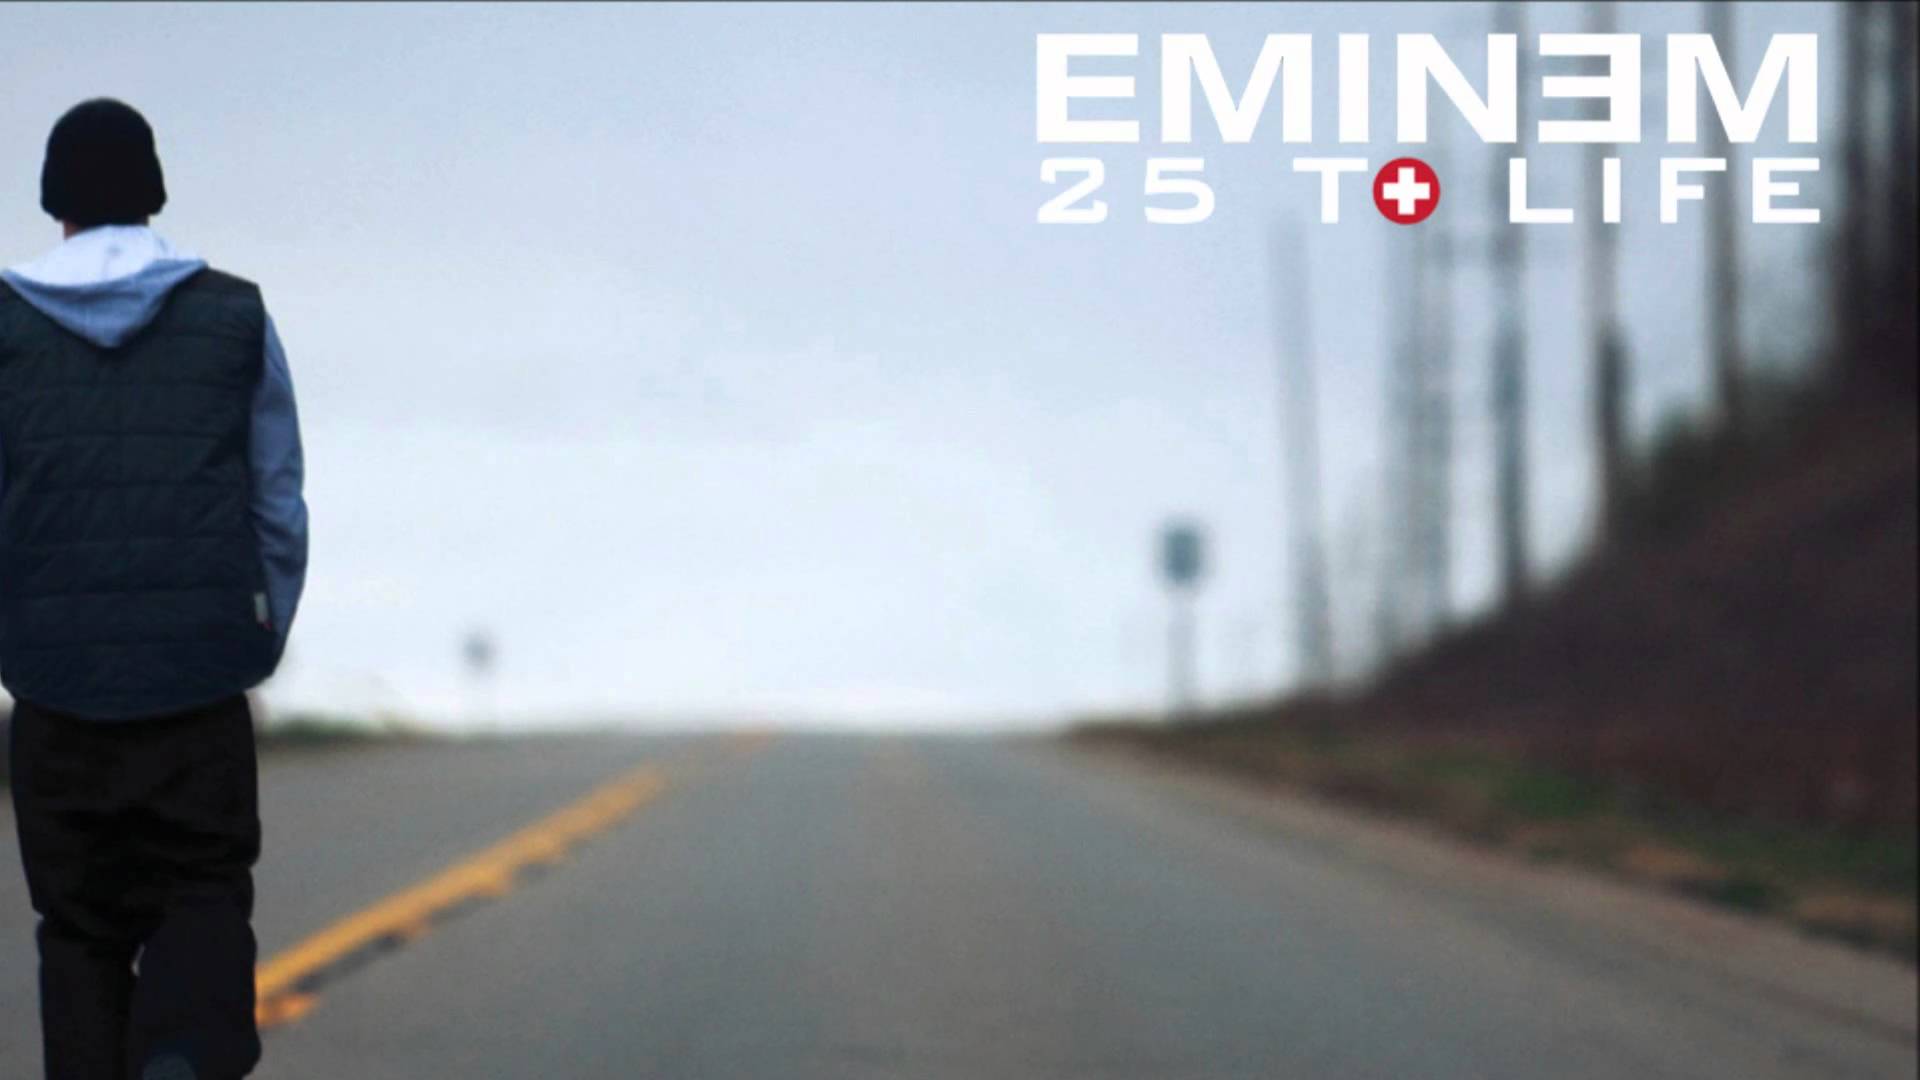 Eminem Recovery Wallpaper Free Eminem Recovery Background